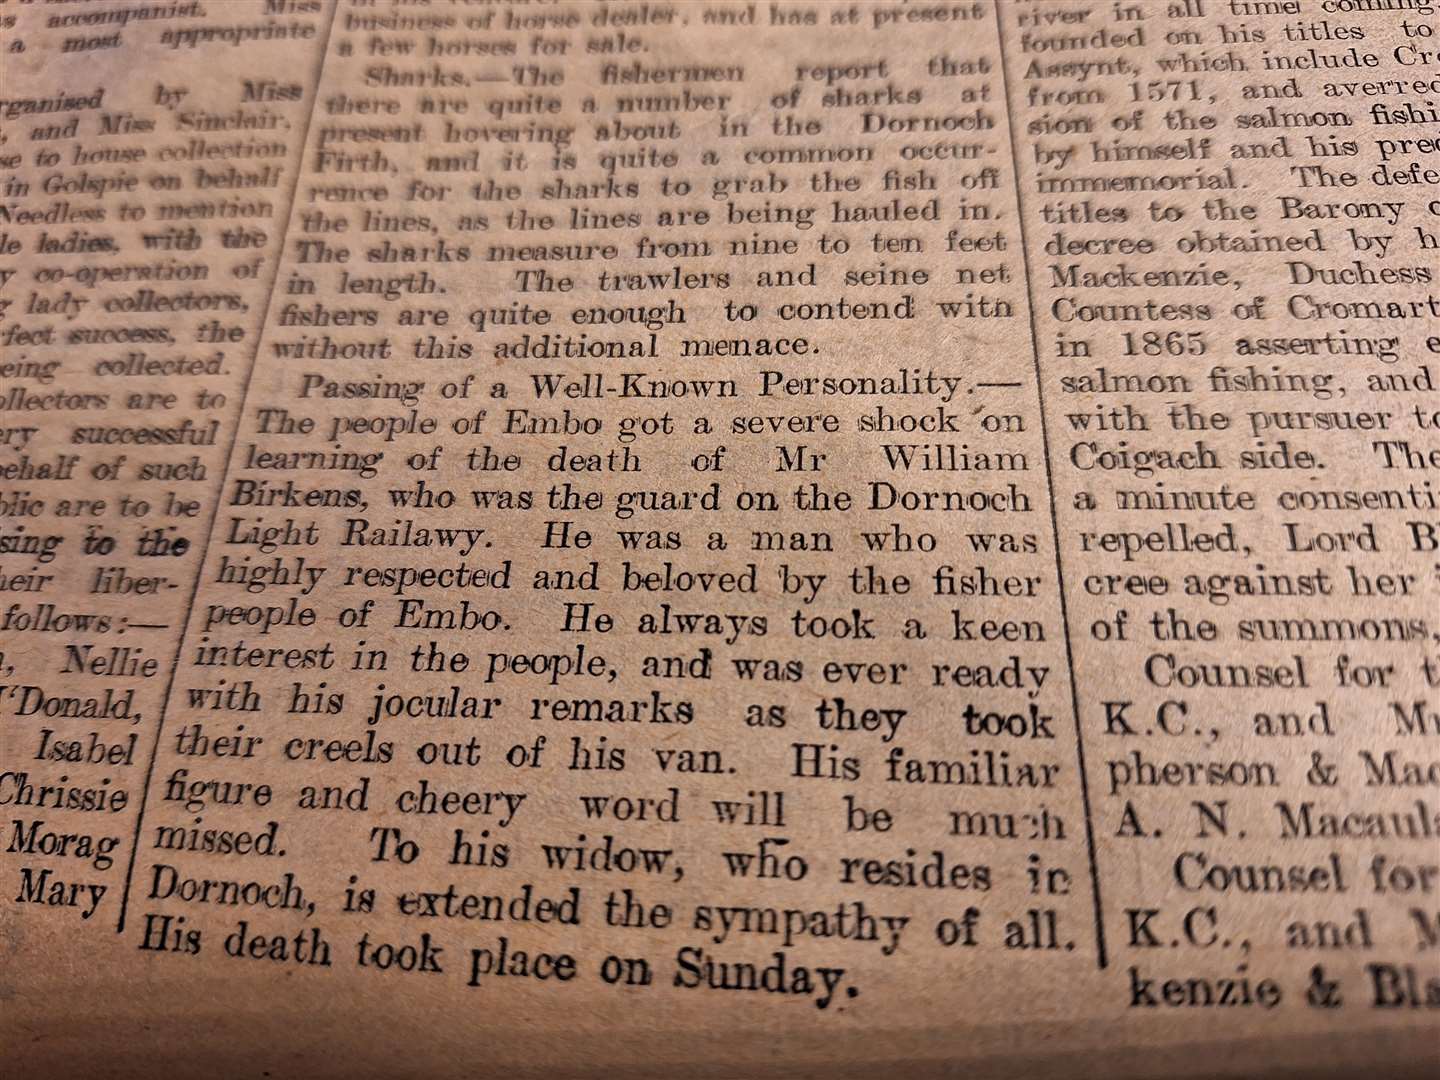 From the edition of November 15, 1923.